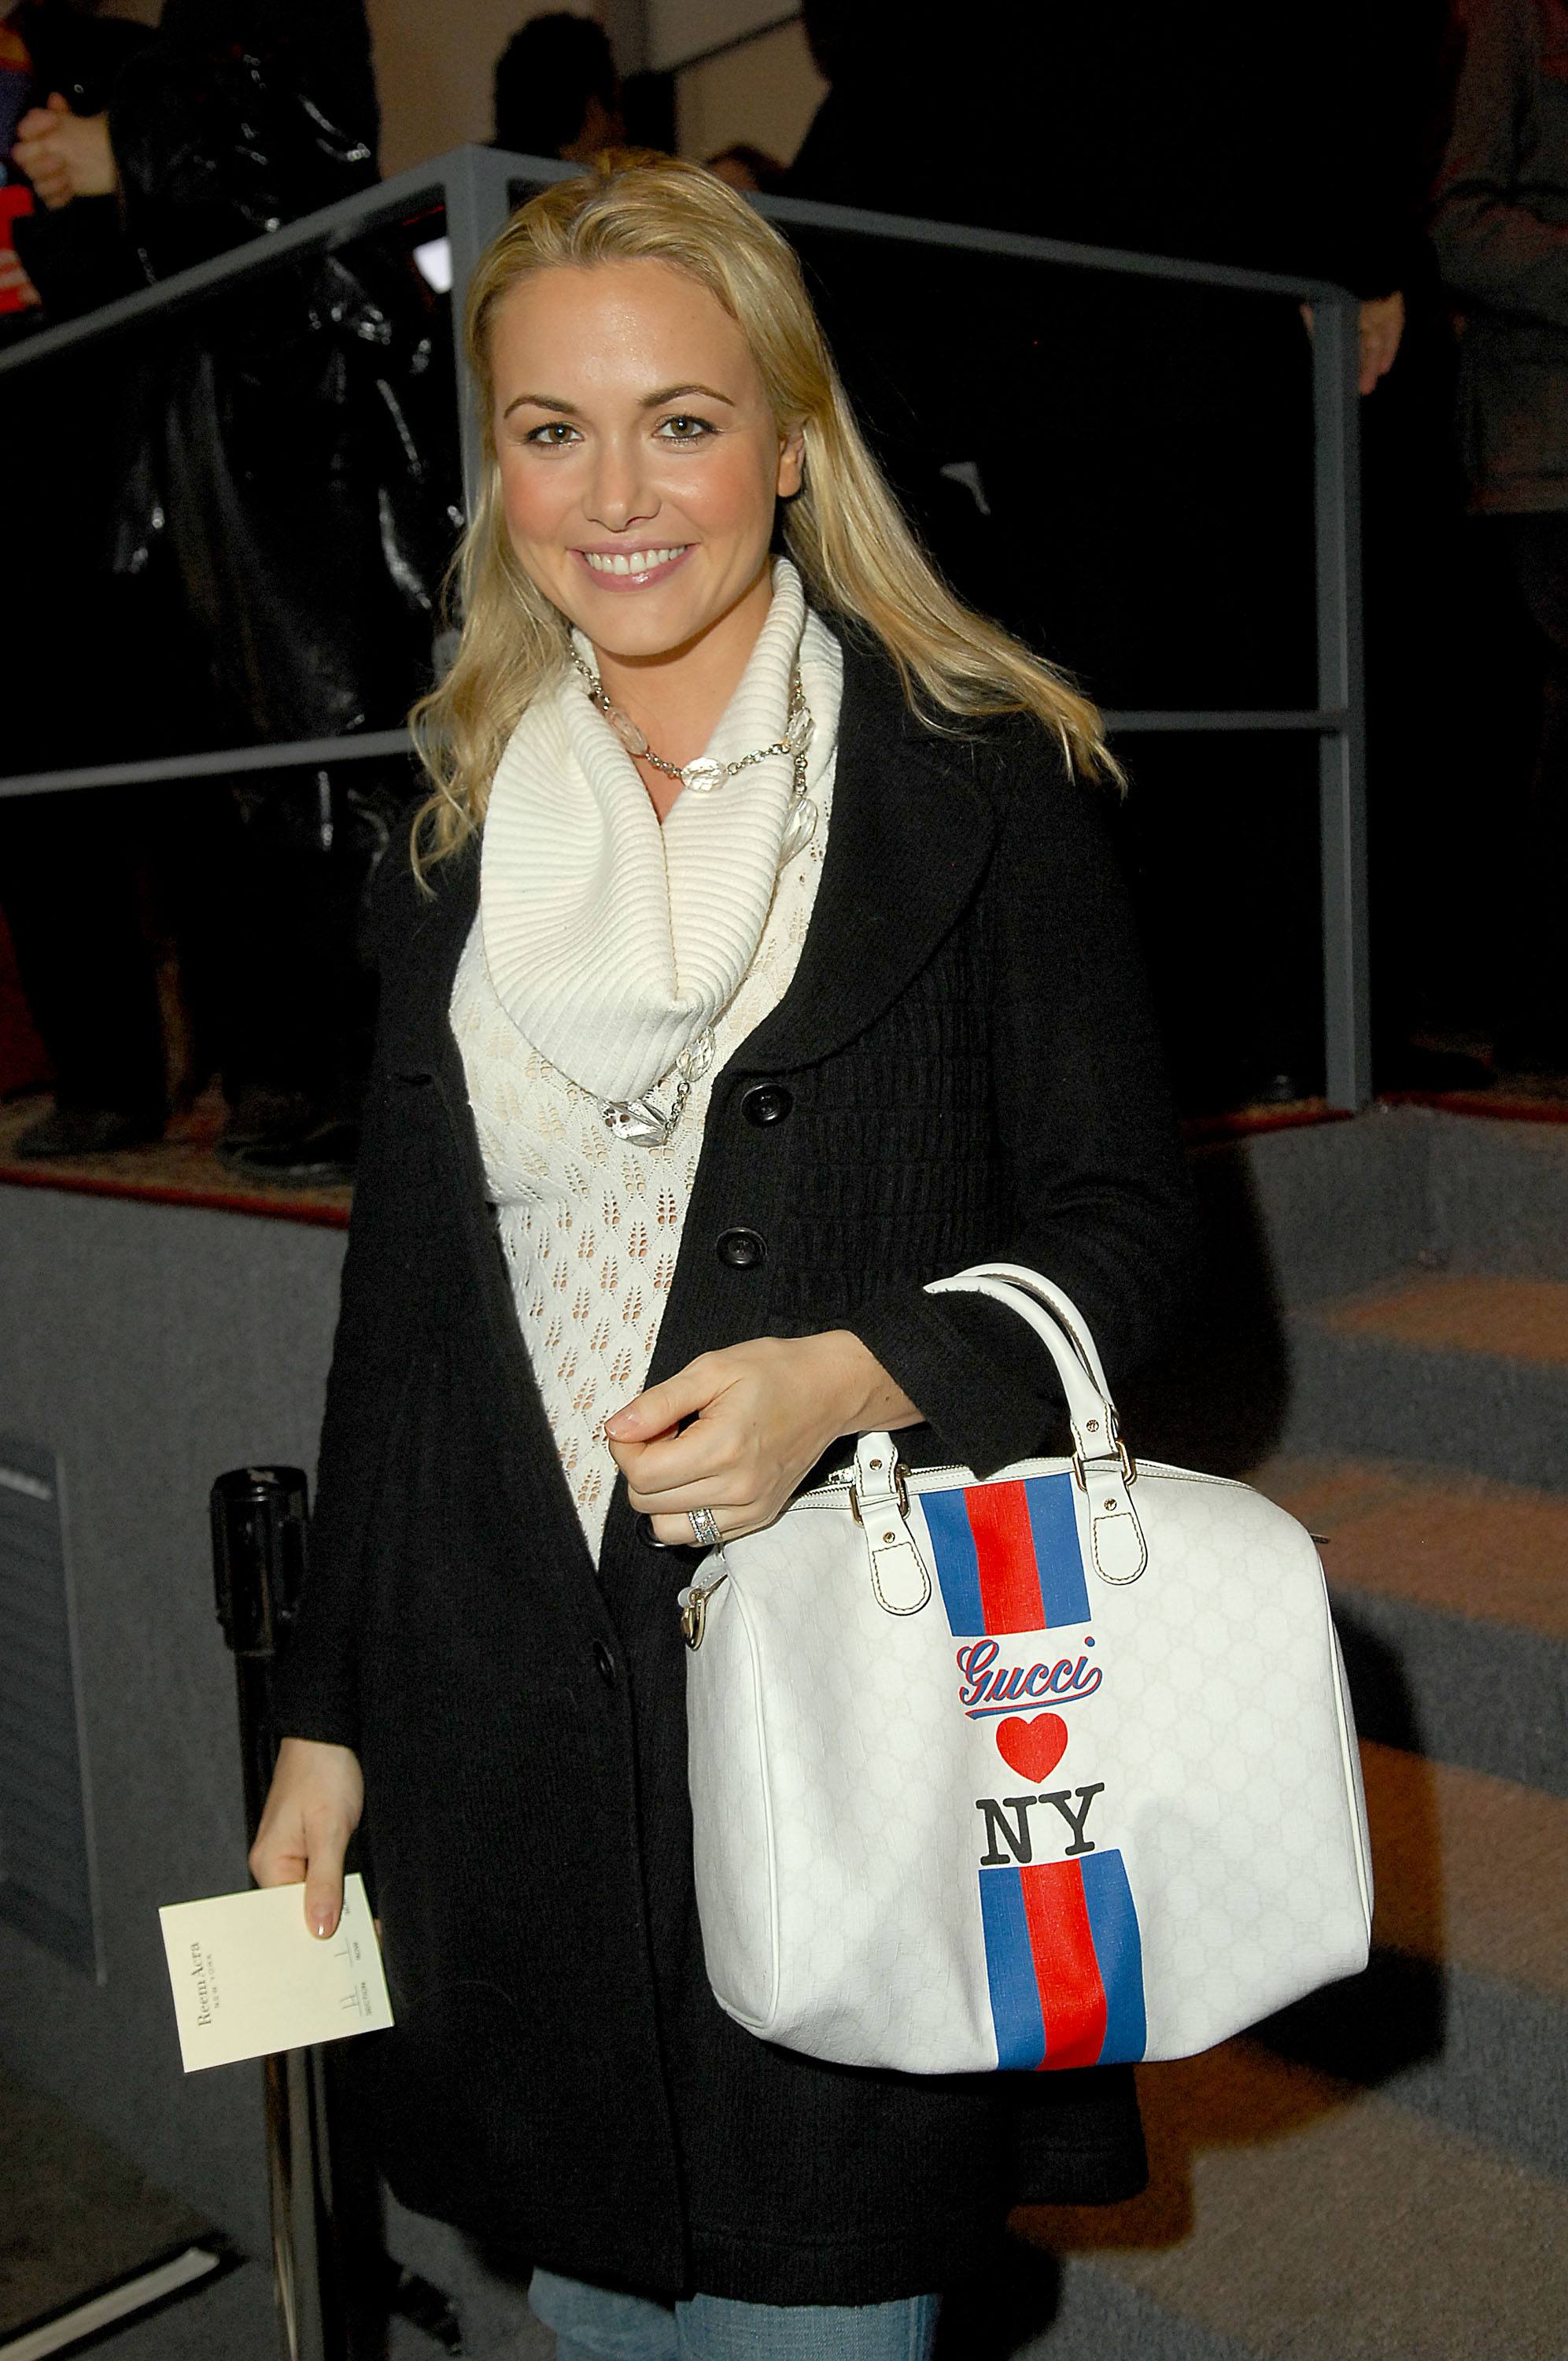 Vanessa Trump poses at the Imperia Vodka booth during Mercedes-Benz Fashion Week Fall 2008